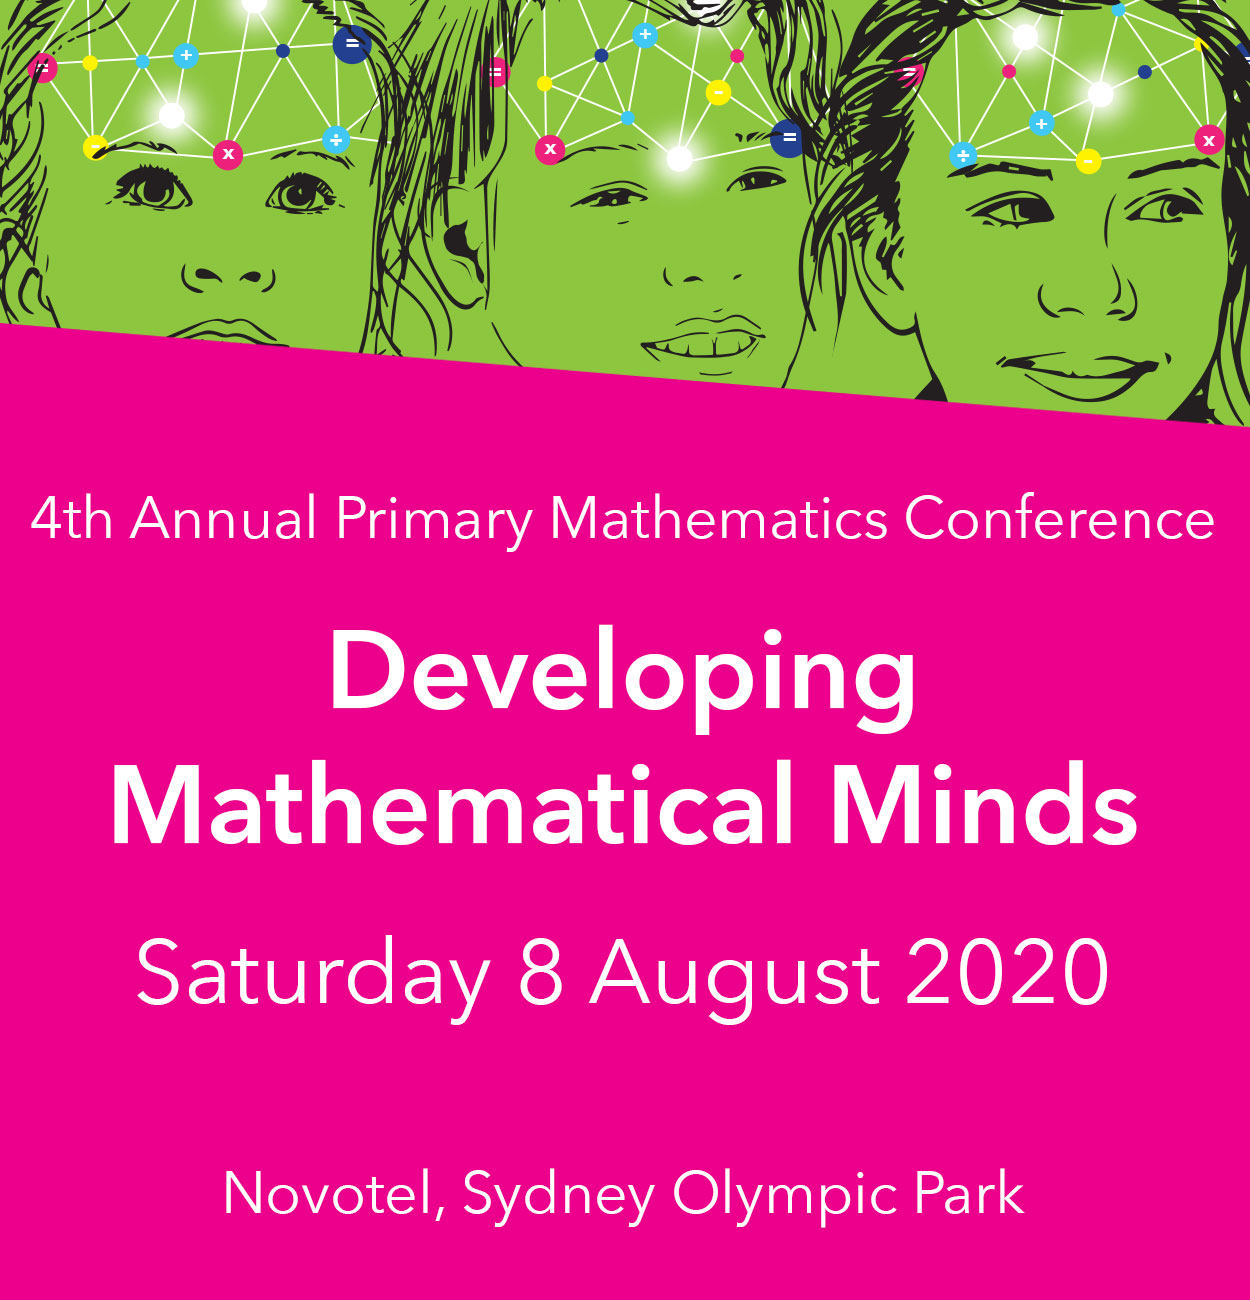 4th Annual Primary Mathematics Conference | Developing Mathematical Minds | Saturday 8 August 2020 | Novotel, Sydney Olympic Park